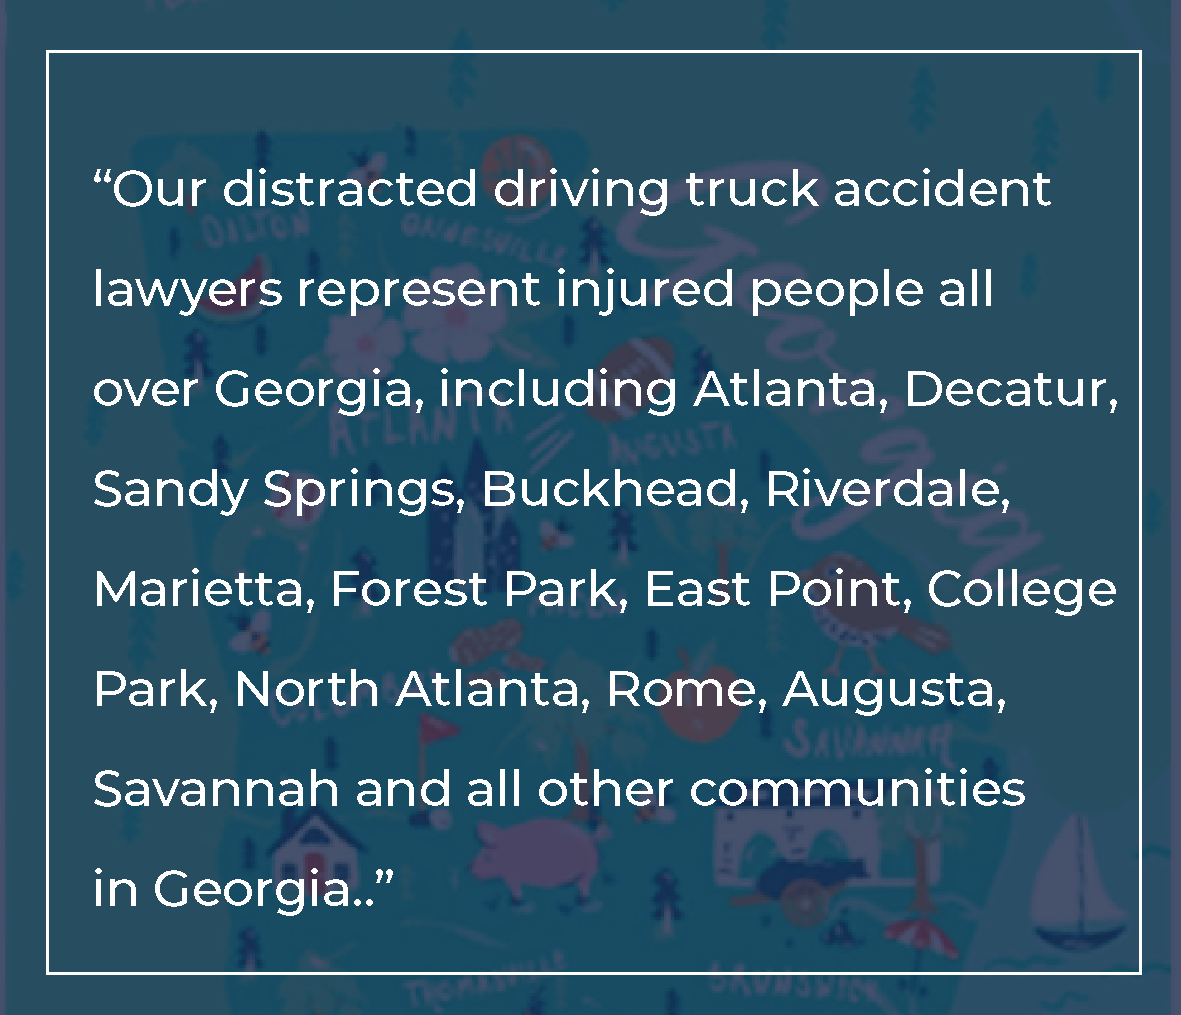 Our distracted driving truck accident lawyers represent injured people from all communities in Georgia